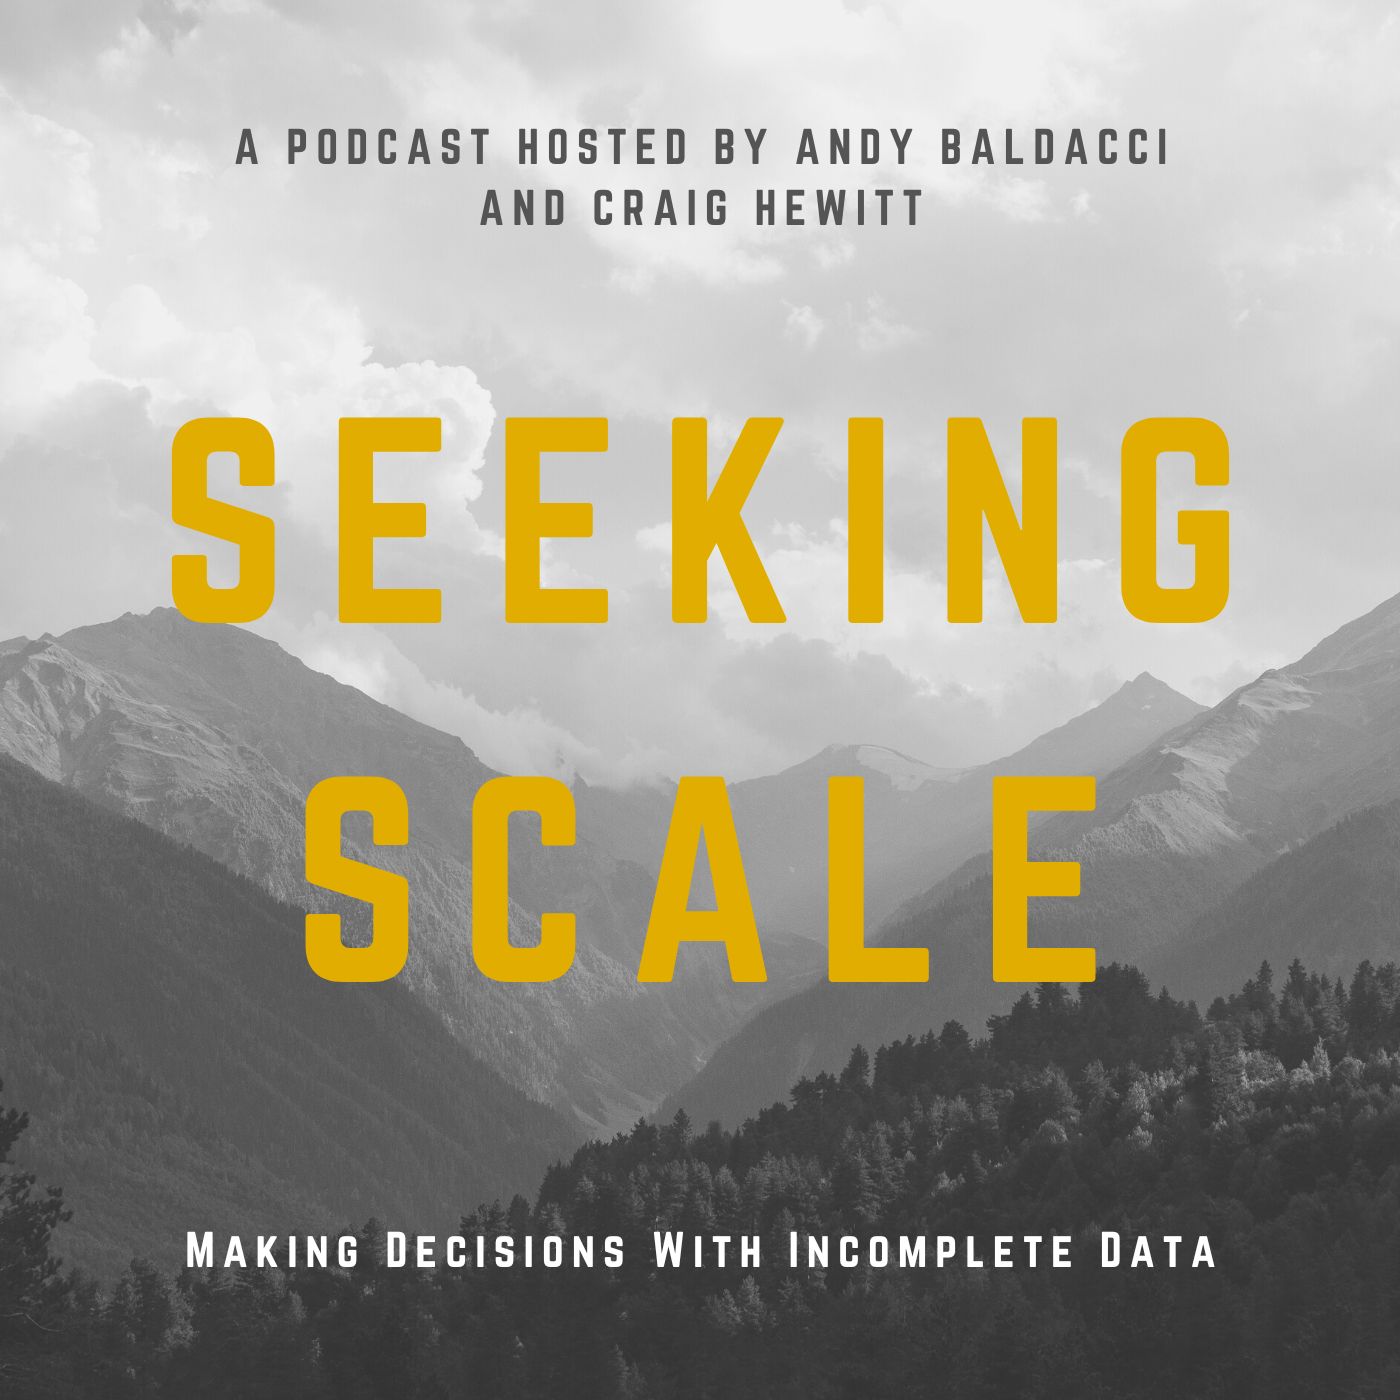 Making Decisions With Incomplete Data